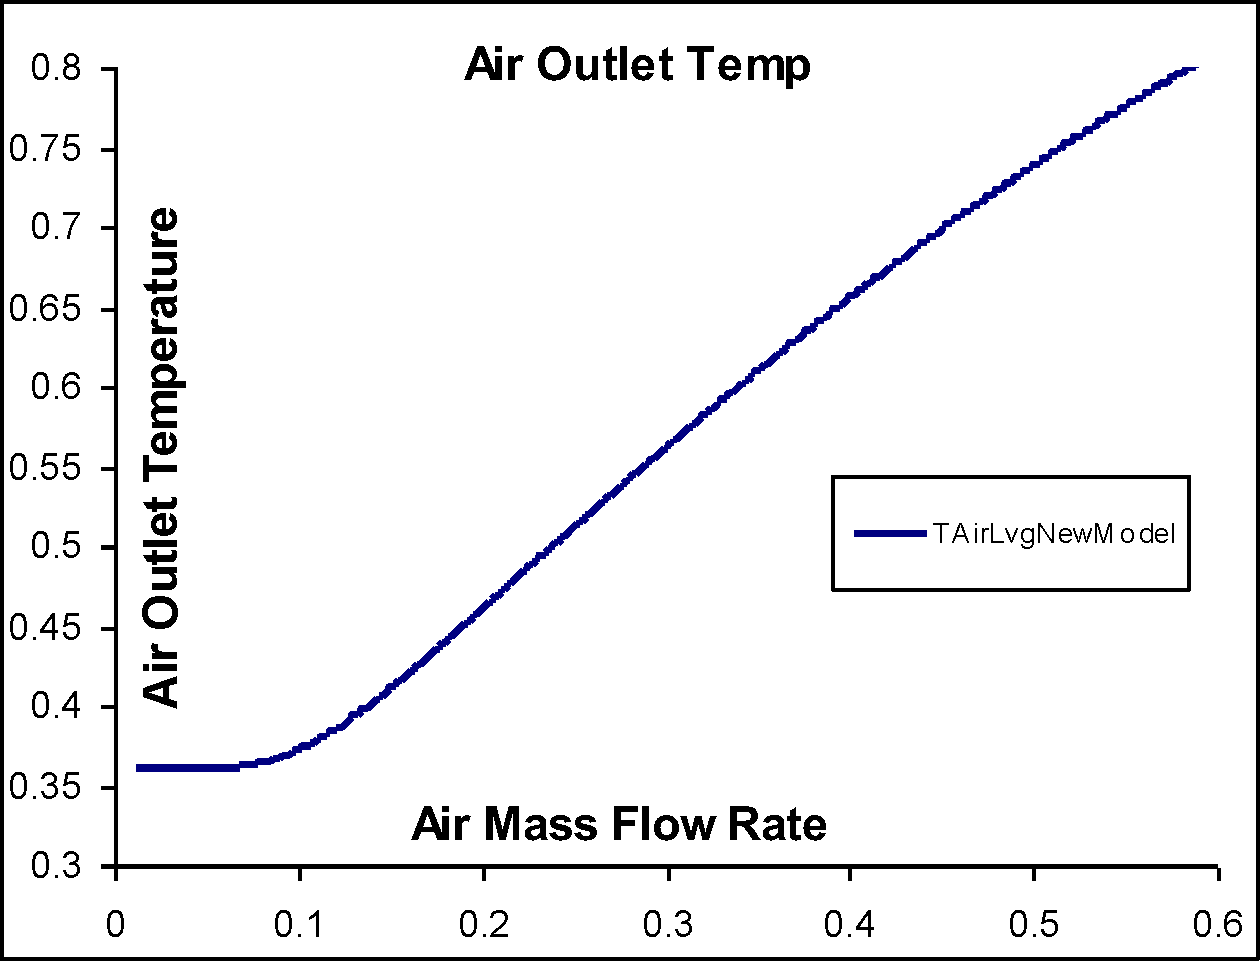 Air Outlet Temperature Vs. Air Mass Flow Rate